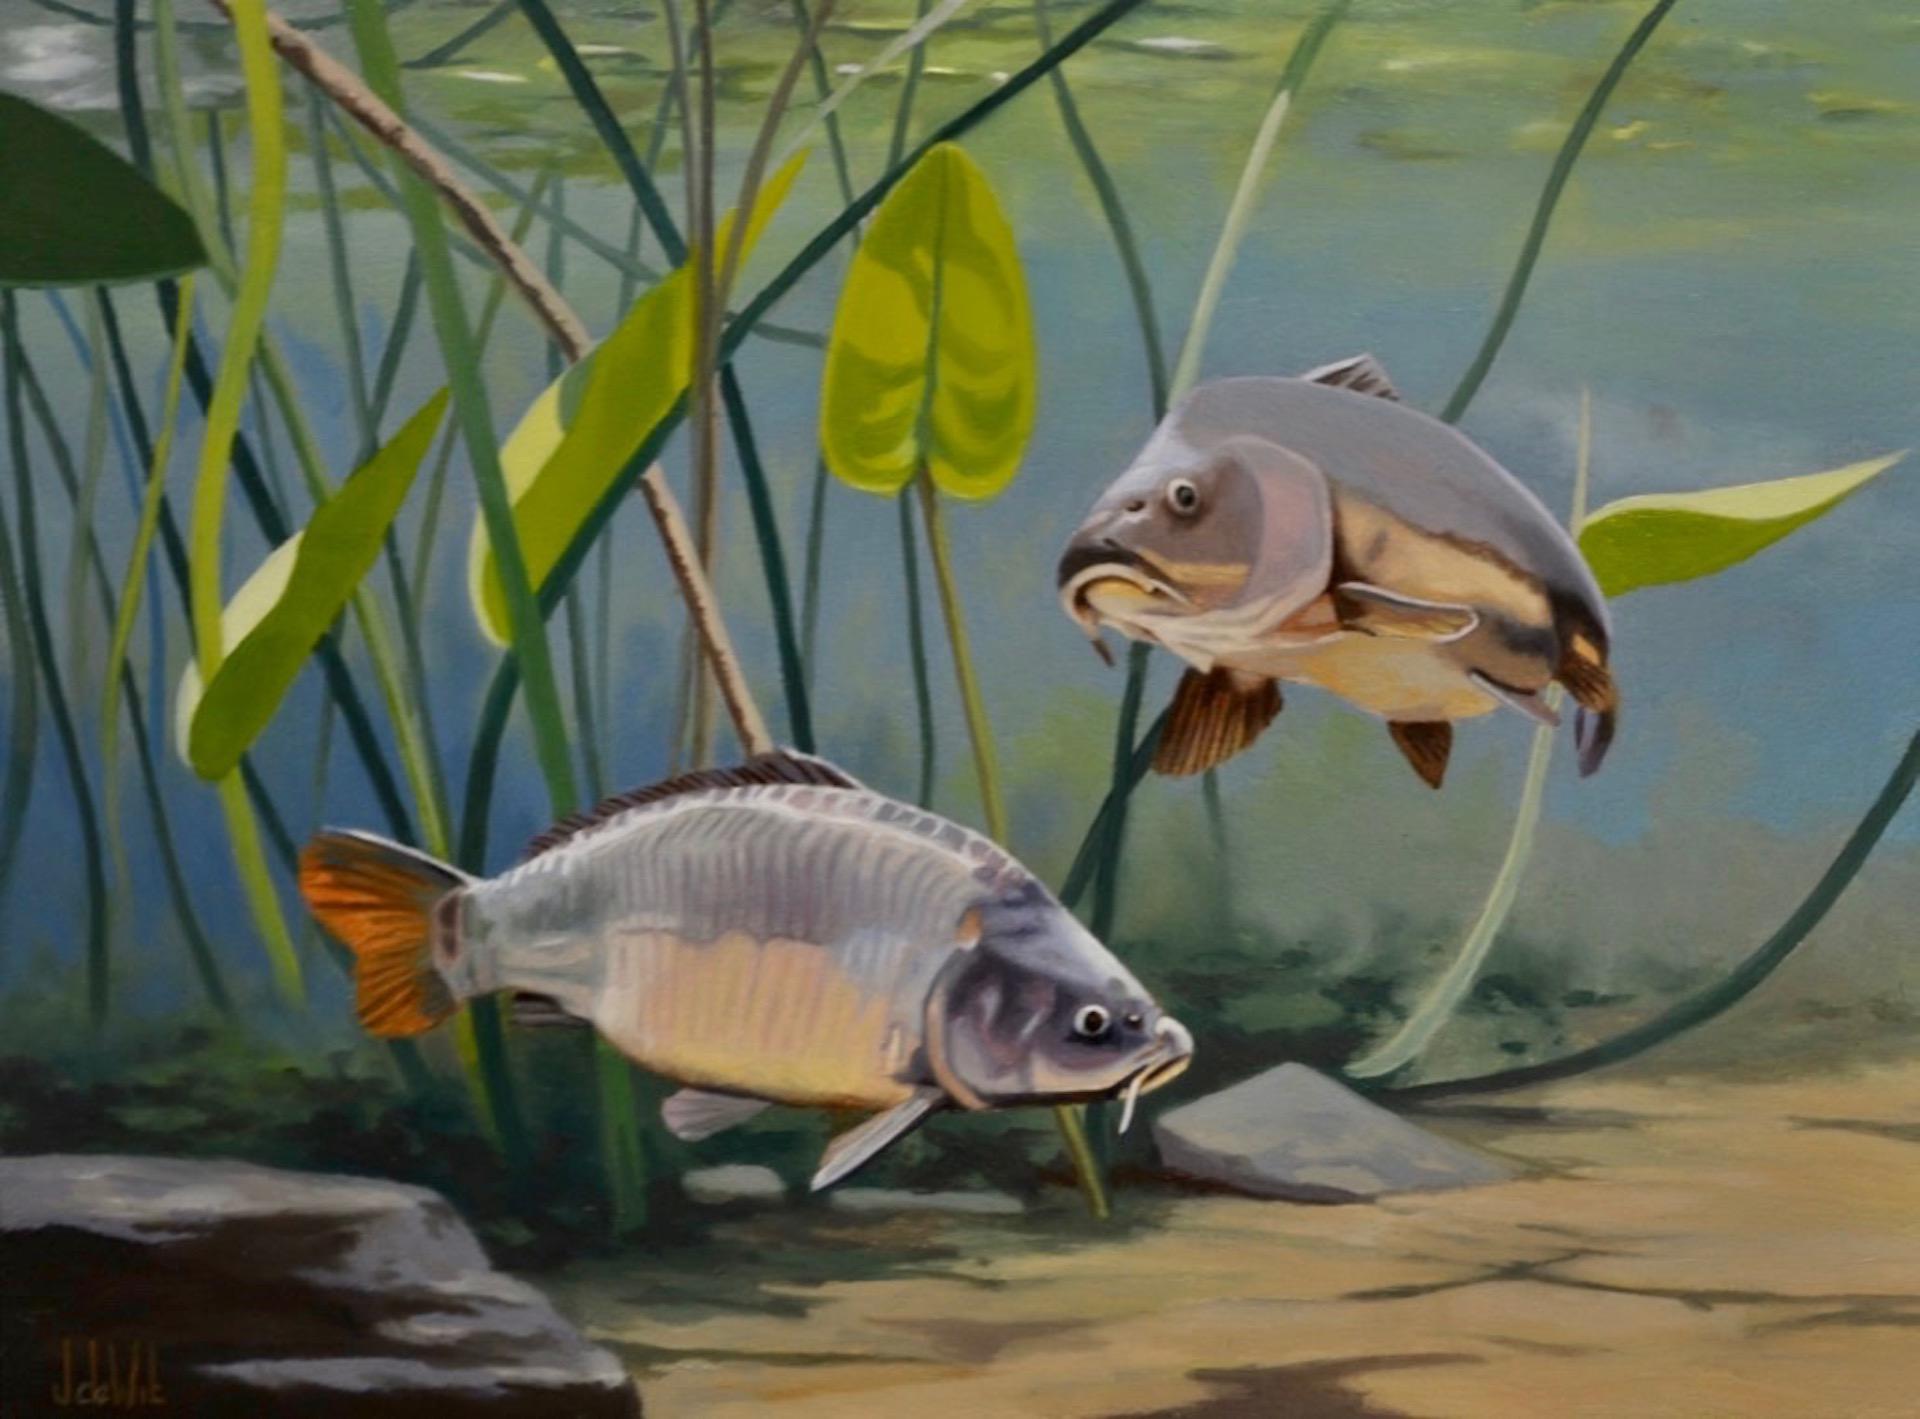 Jos de Wit Animal Painting - Cypri D3- 21st Century Contemporary Realistic Painting of two Fishes, Swimming